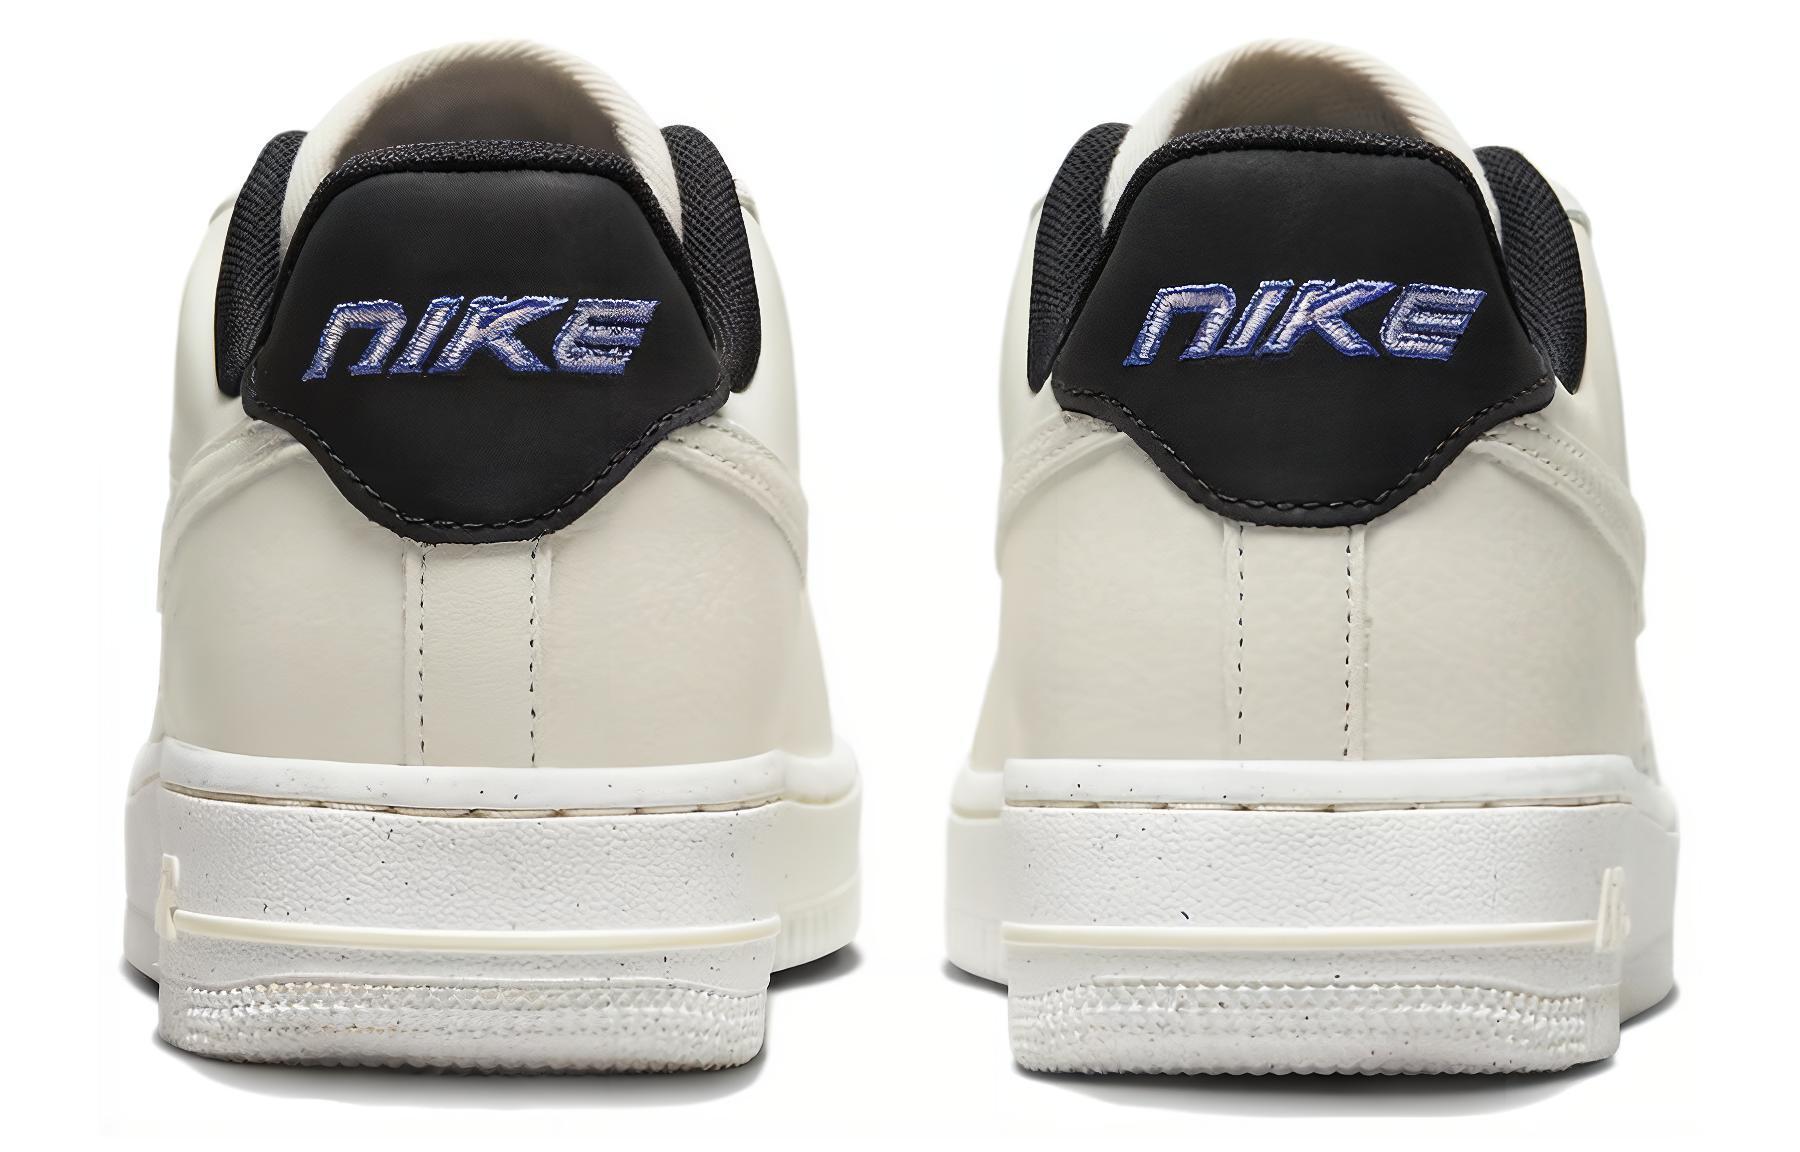 Nike Air Force 1 "White Coconut"